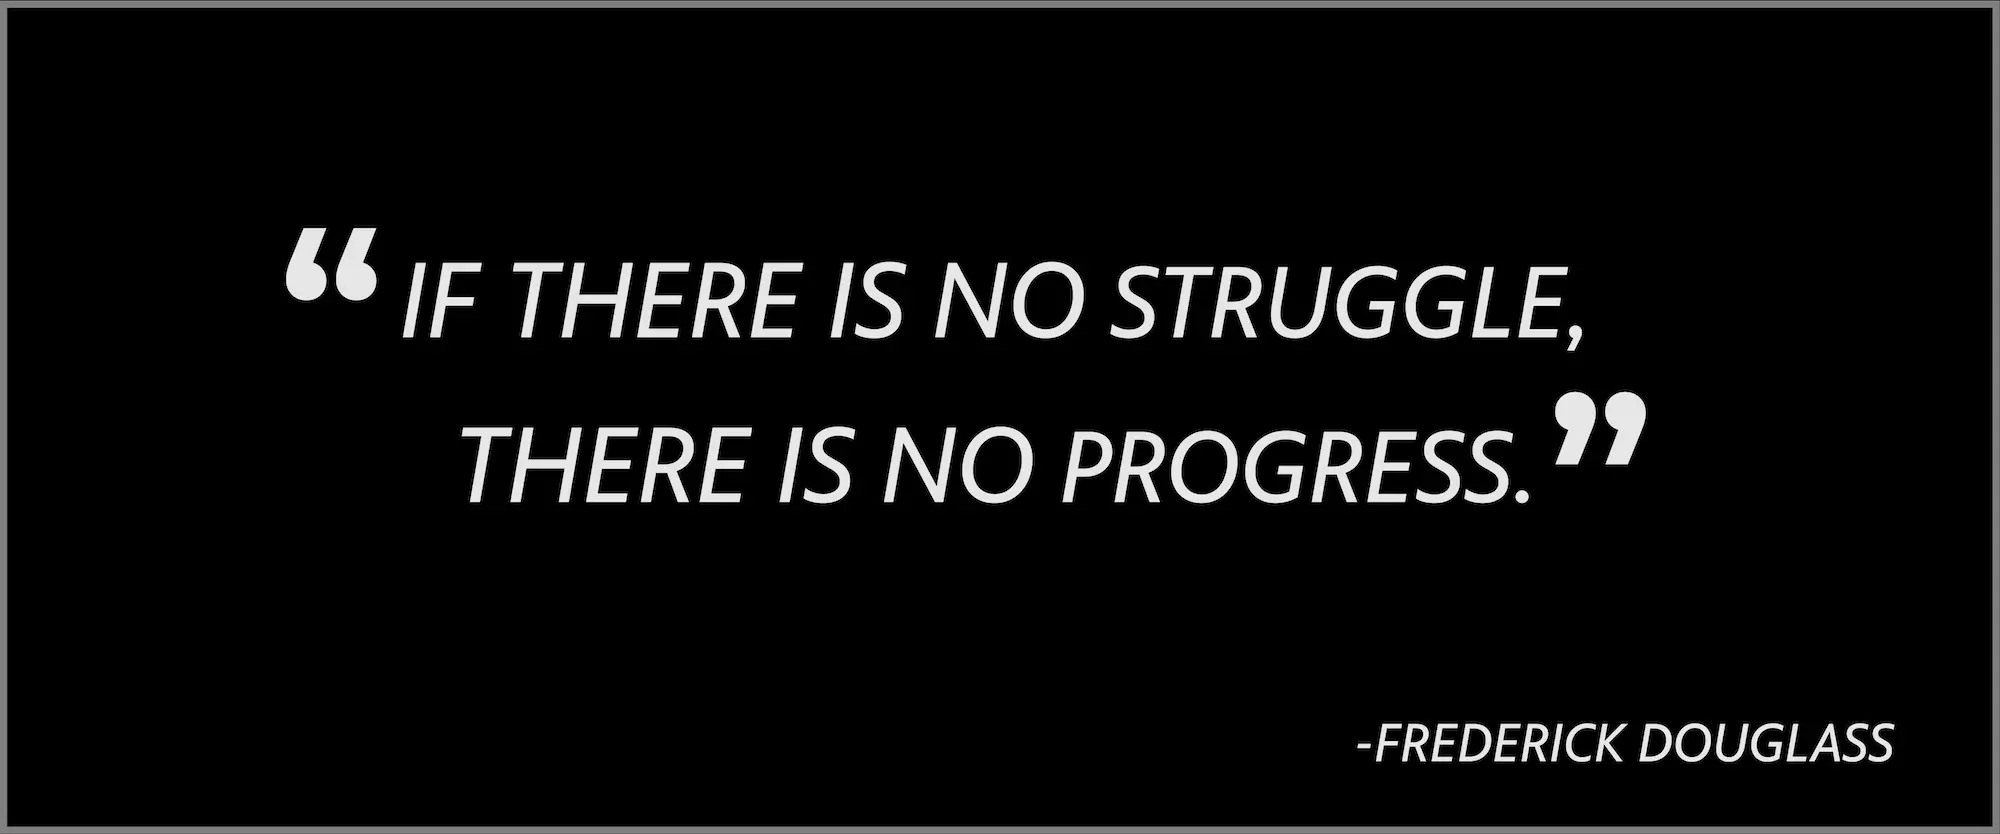 If there is no struggle, there is no progress. -- Frederick Douglas